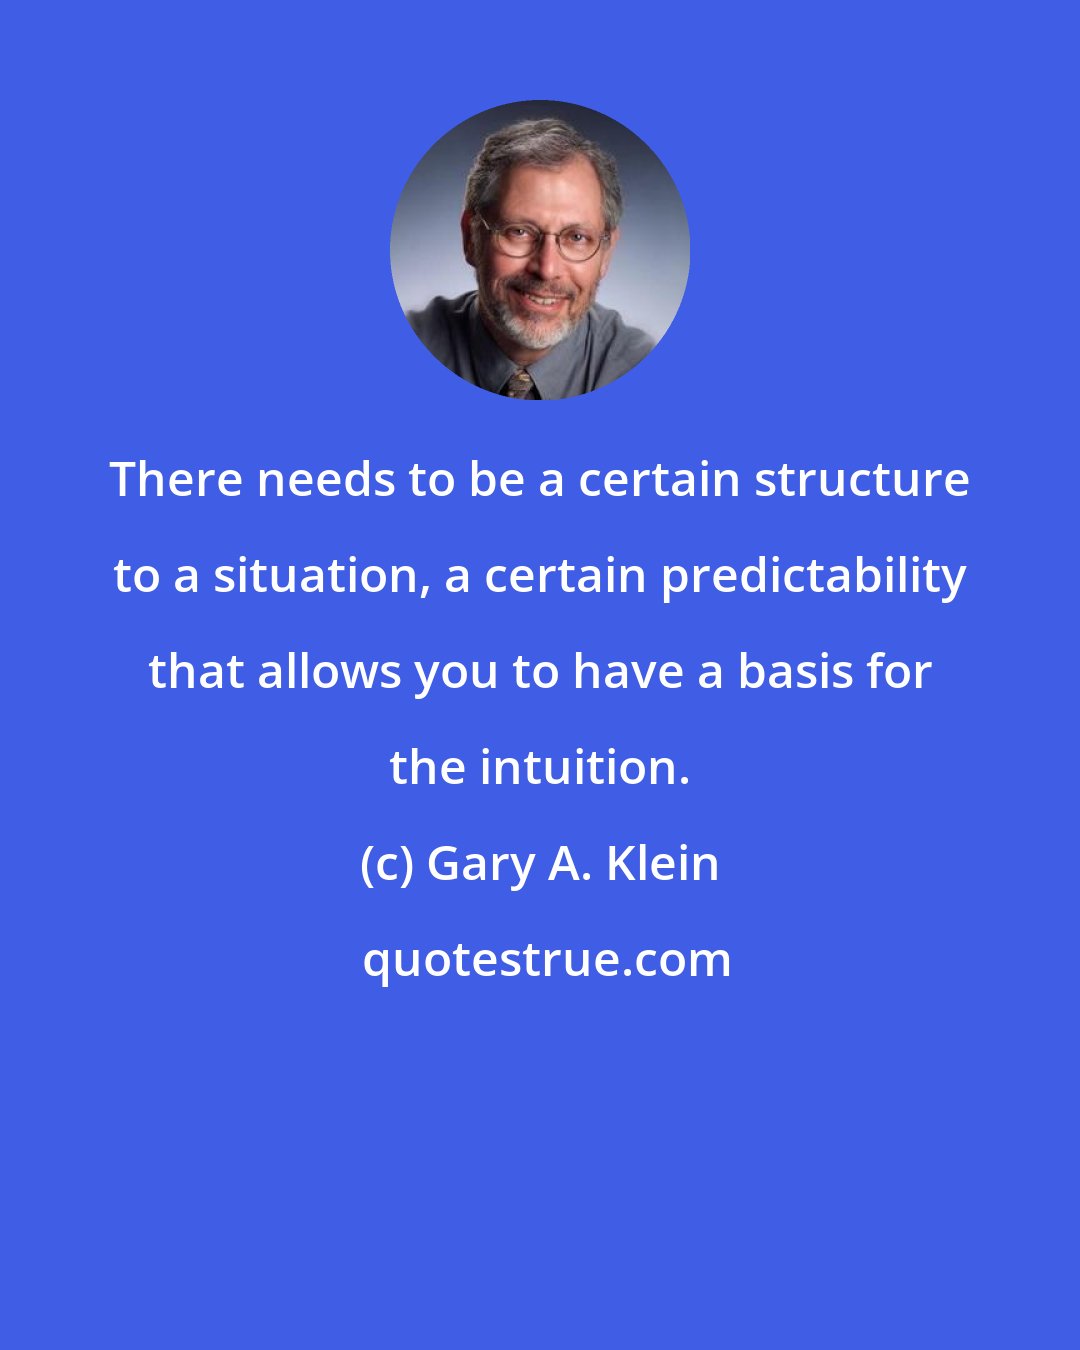 Gary A. Klein: There needs to be a certain structure to a situation, a certain predictability that allows you to have a basis for the intuition.